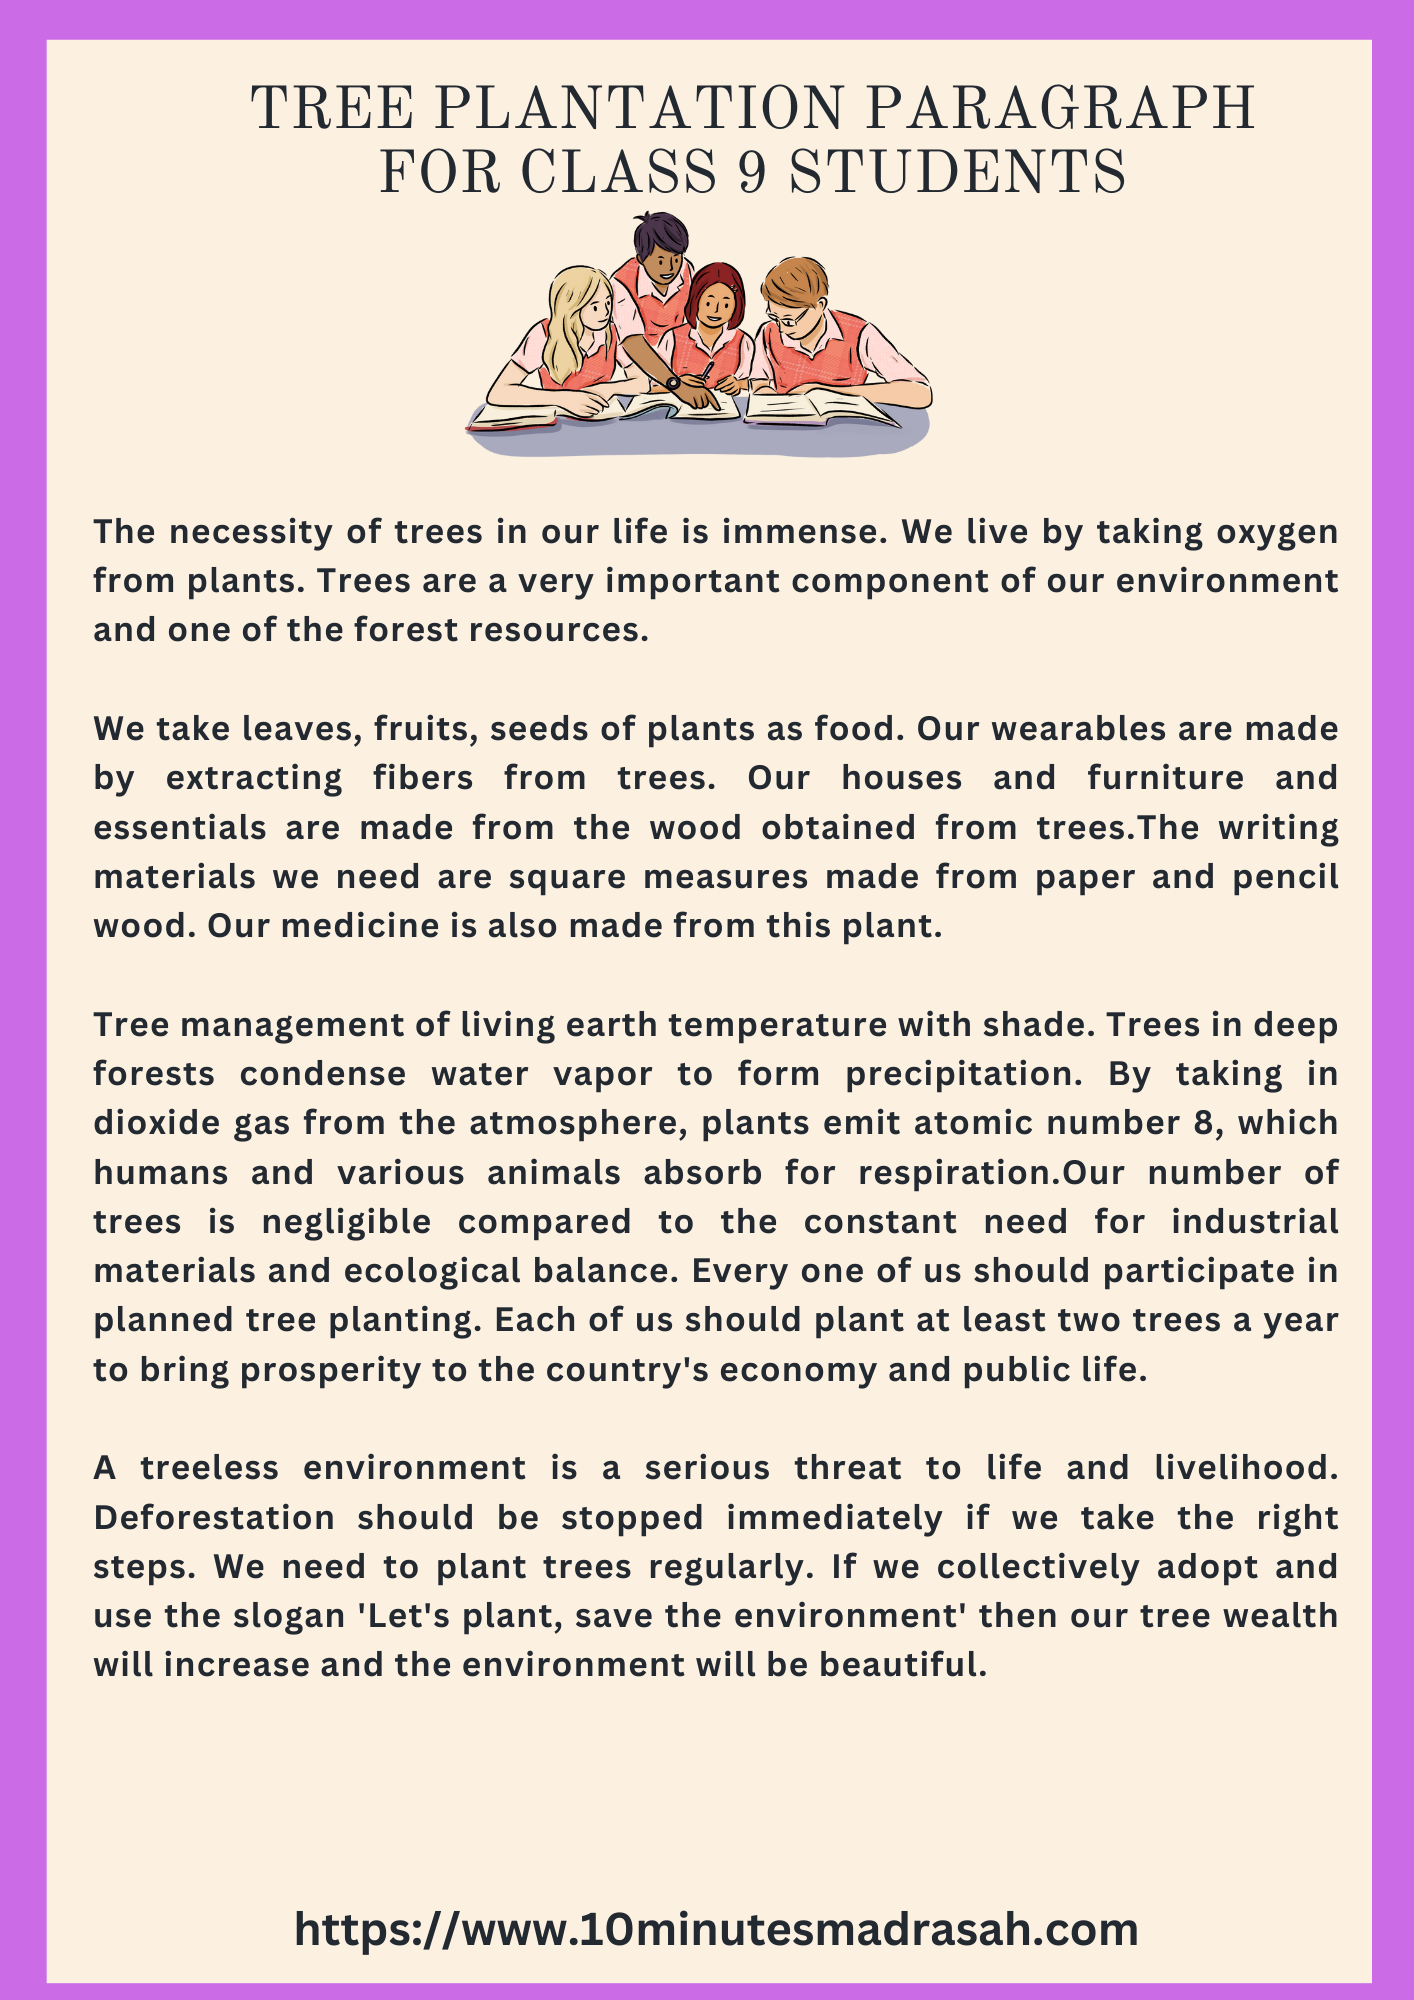 Tree Plantation Paragraph for Class 9 Students